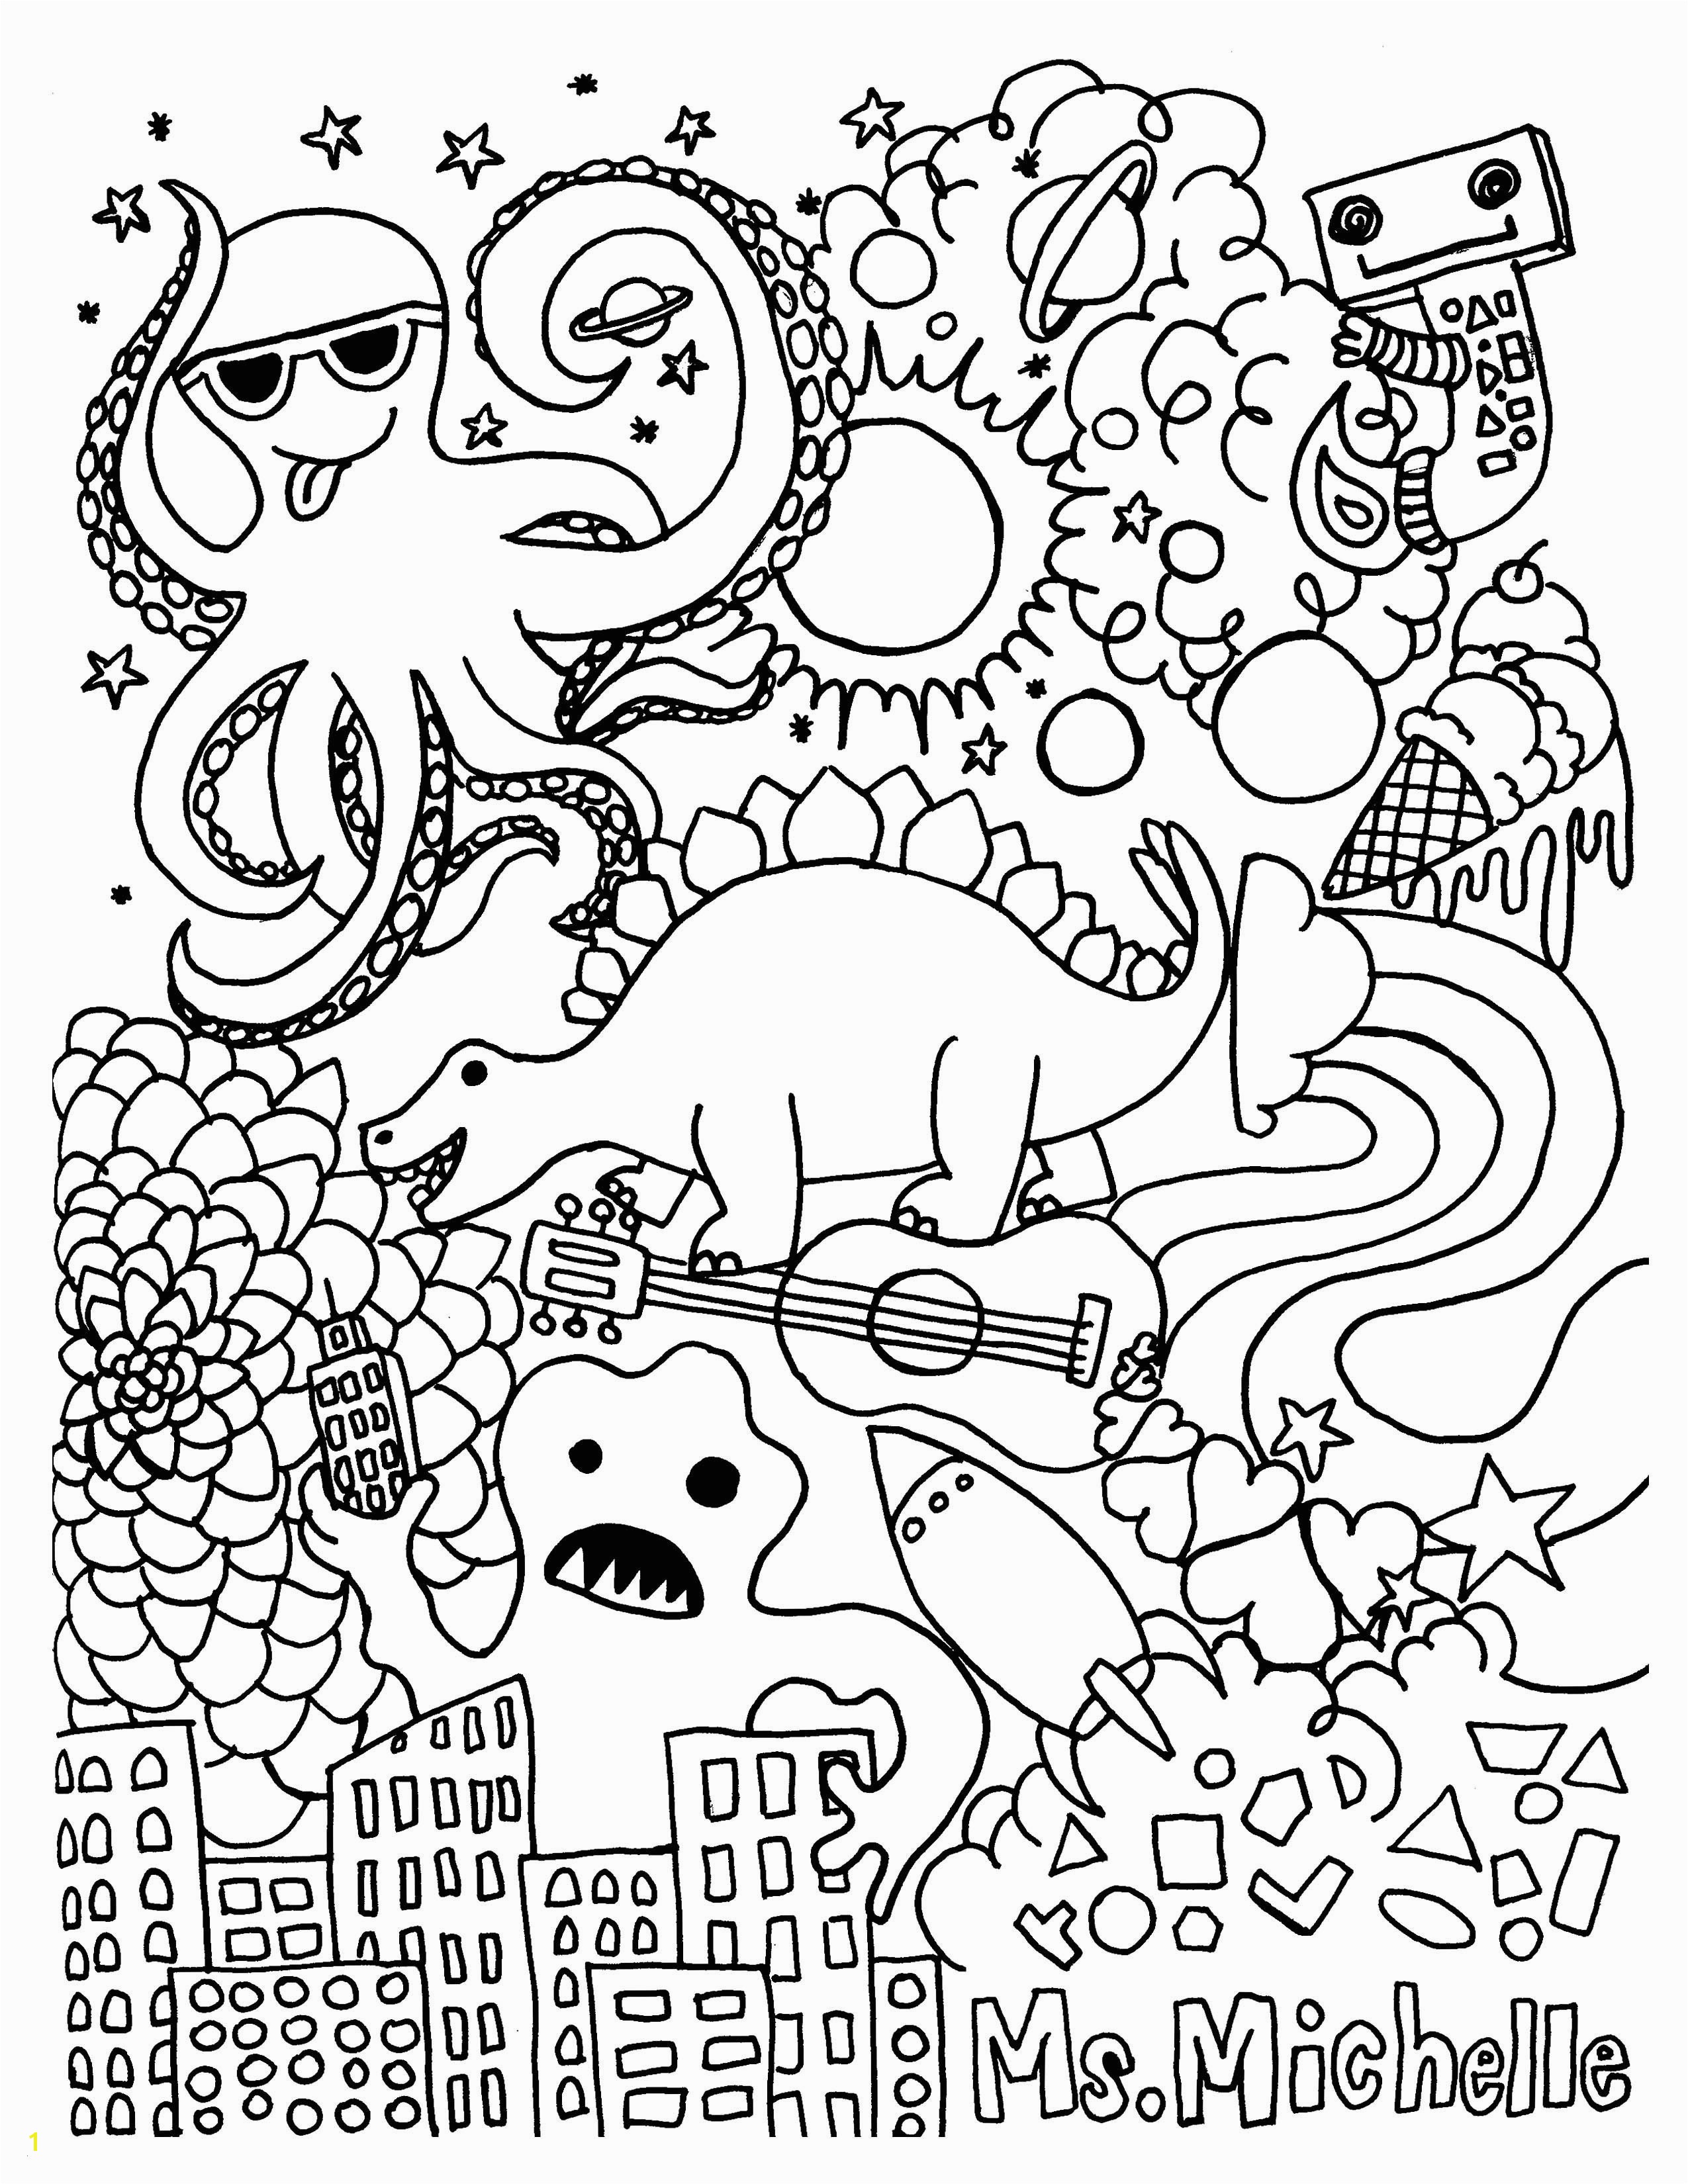 Coloring Pages Of Sandcastles Educational Coloring Pages Unique Printable Coloring Pages for Kids